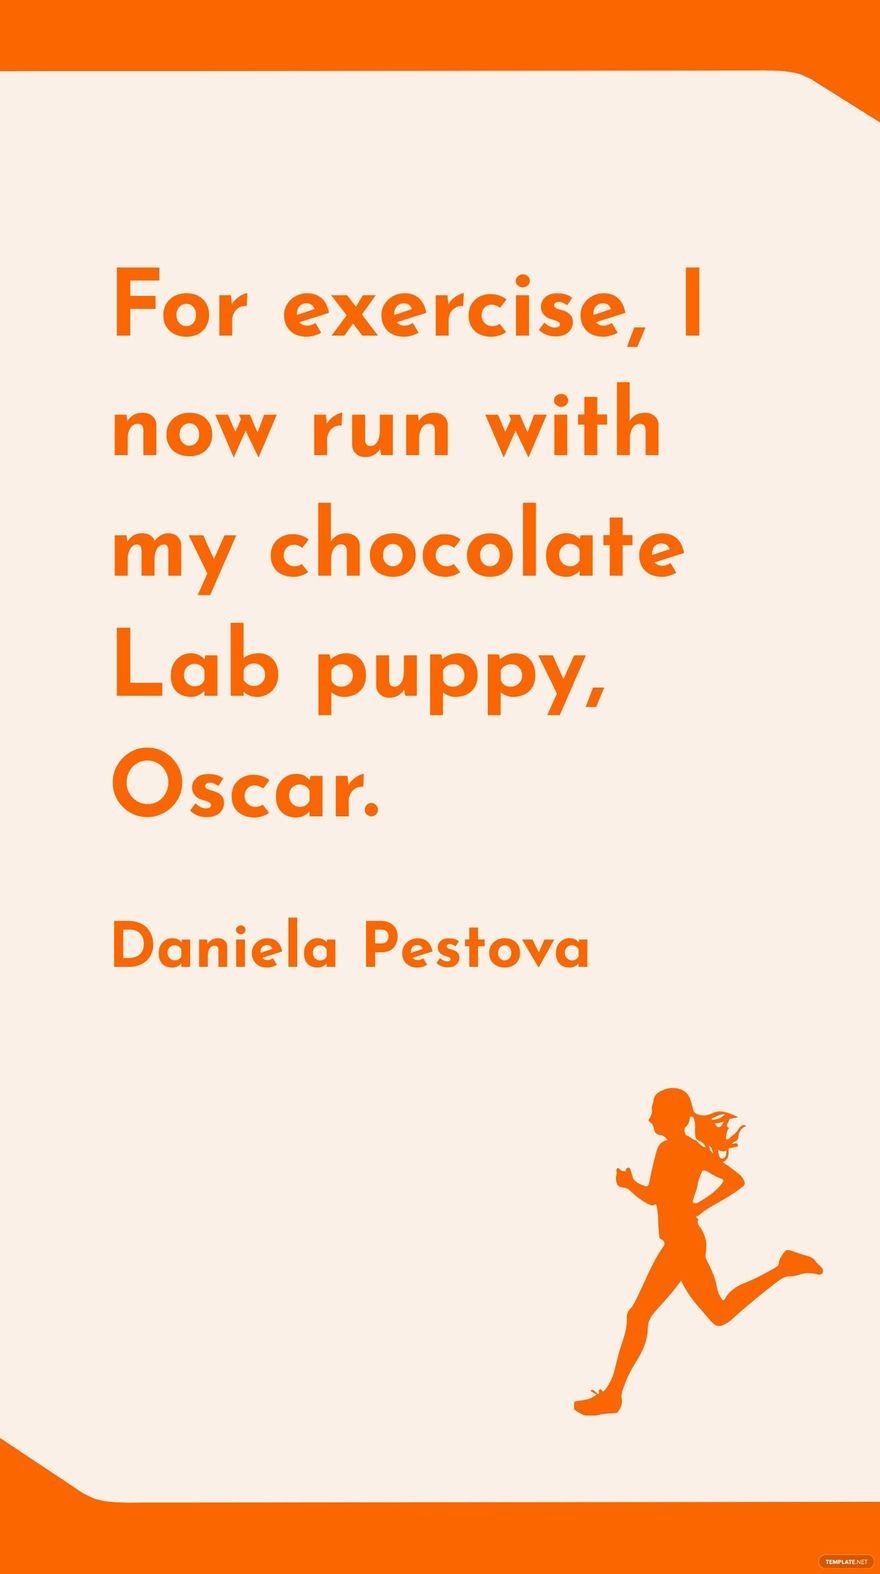 Free Daniela Pestova - For exercise, I now run with my chocolate Lab puppy, Oscar. in JPG